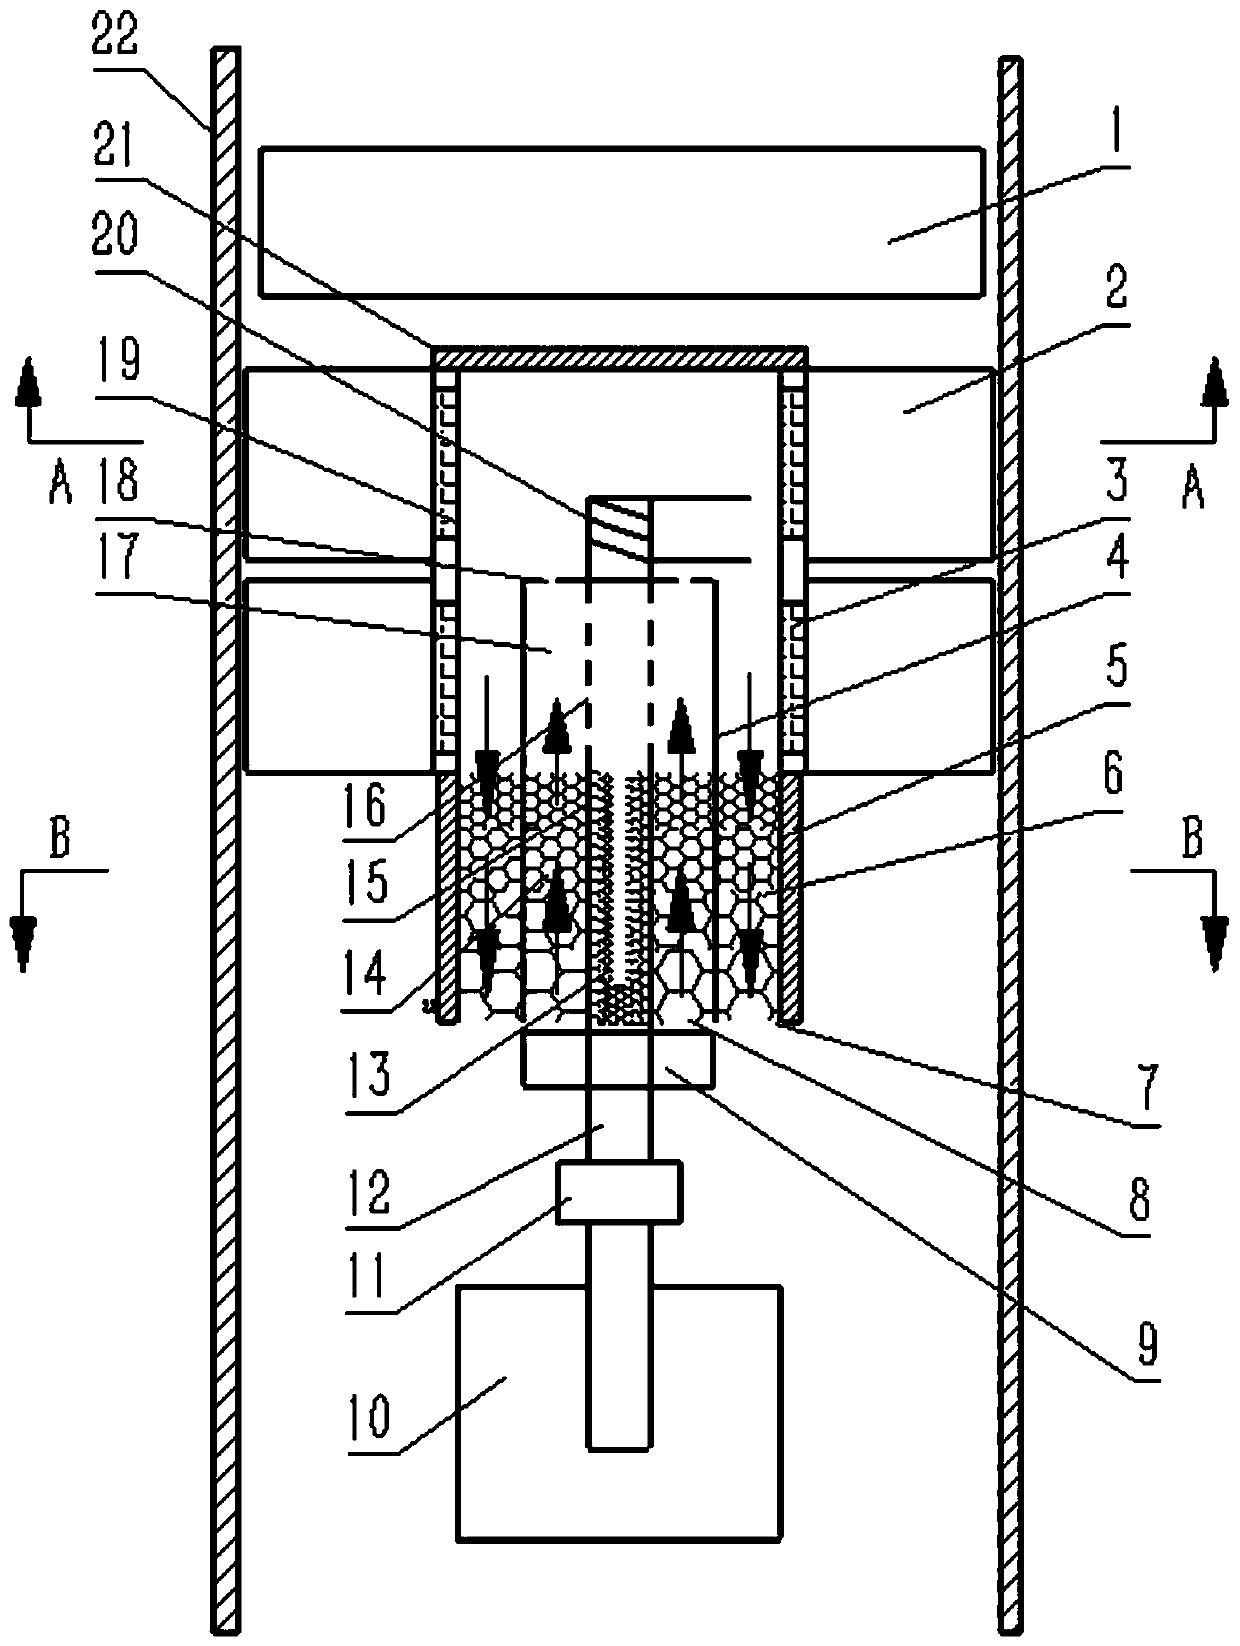 Thermoelectric conversion device based on liquid fuel combustion